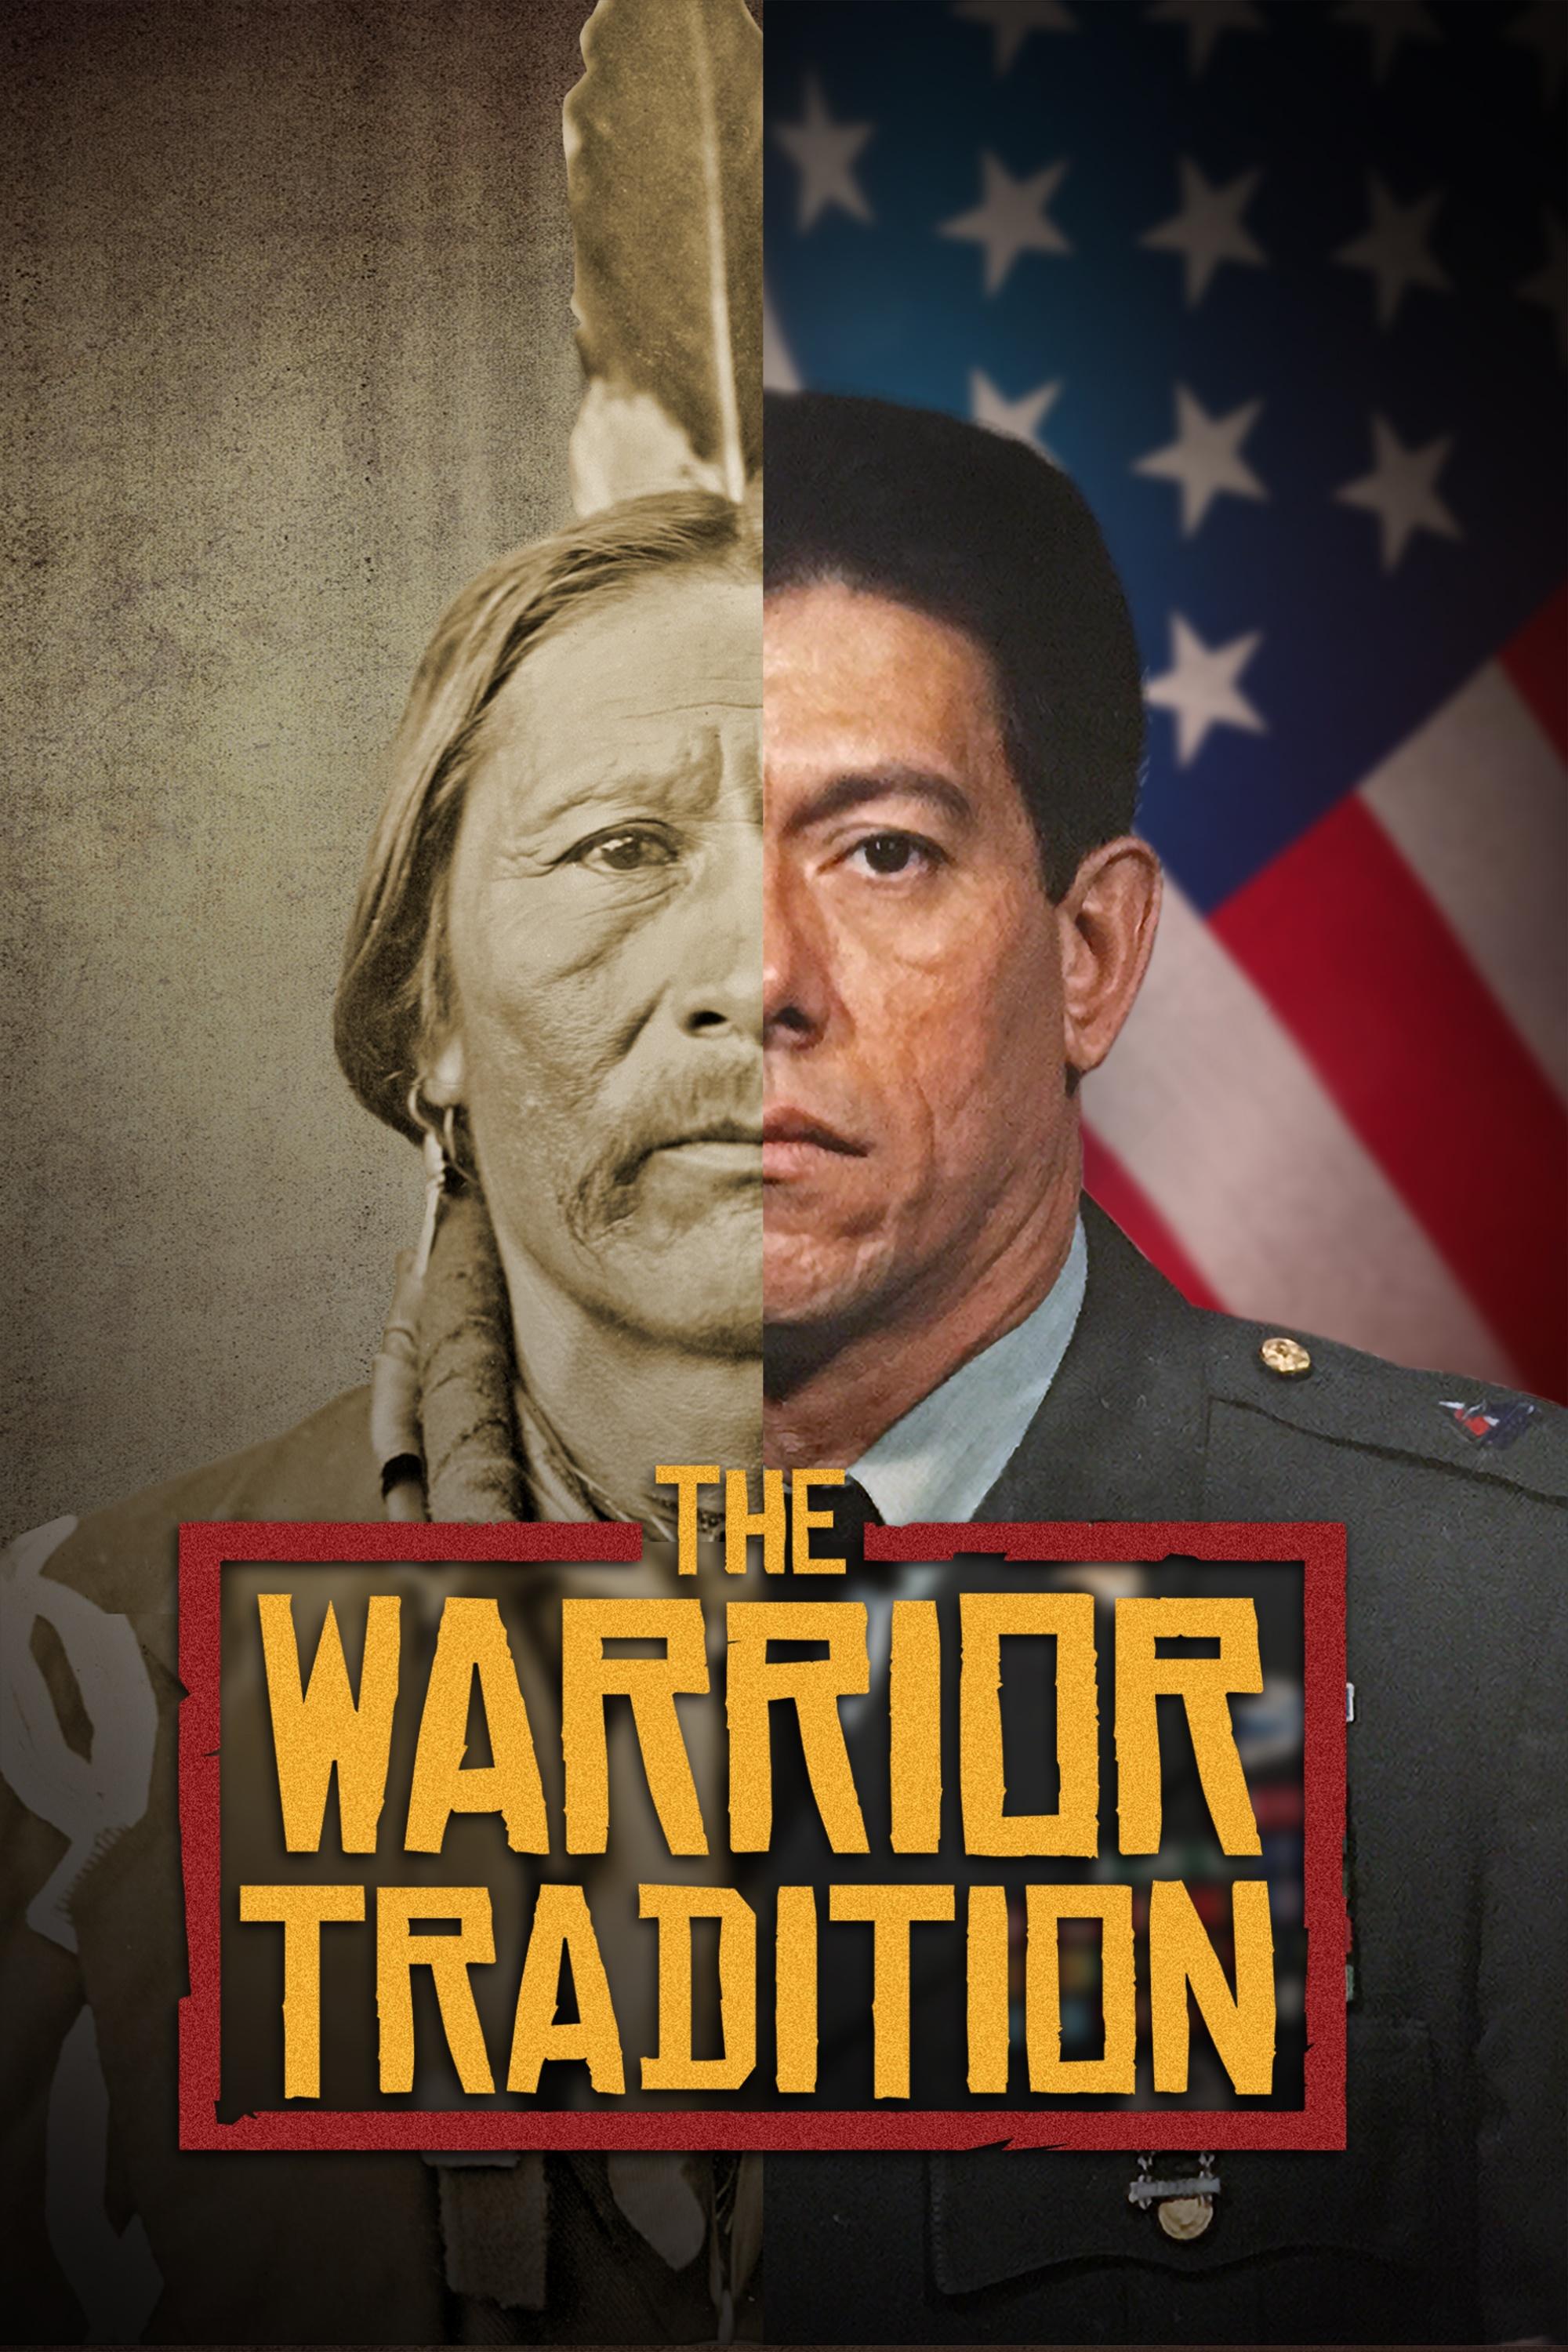 The Warrior Tradition show's poster